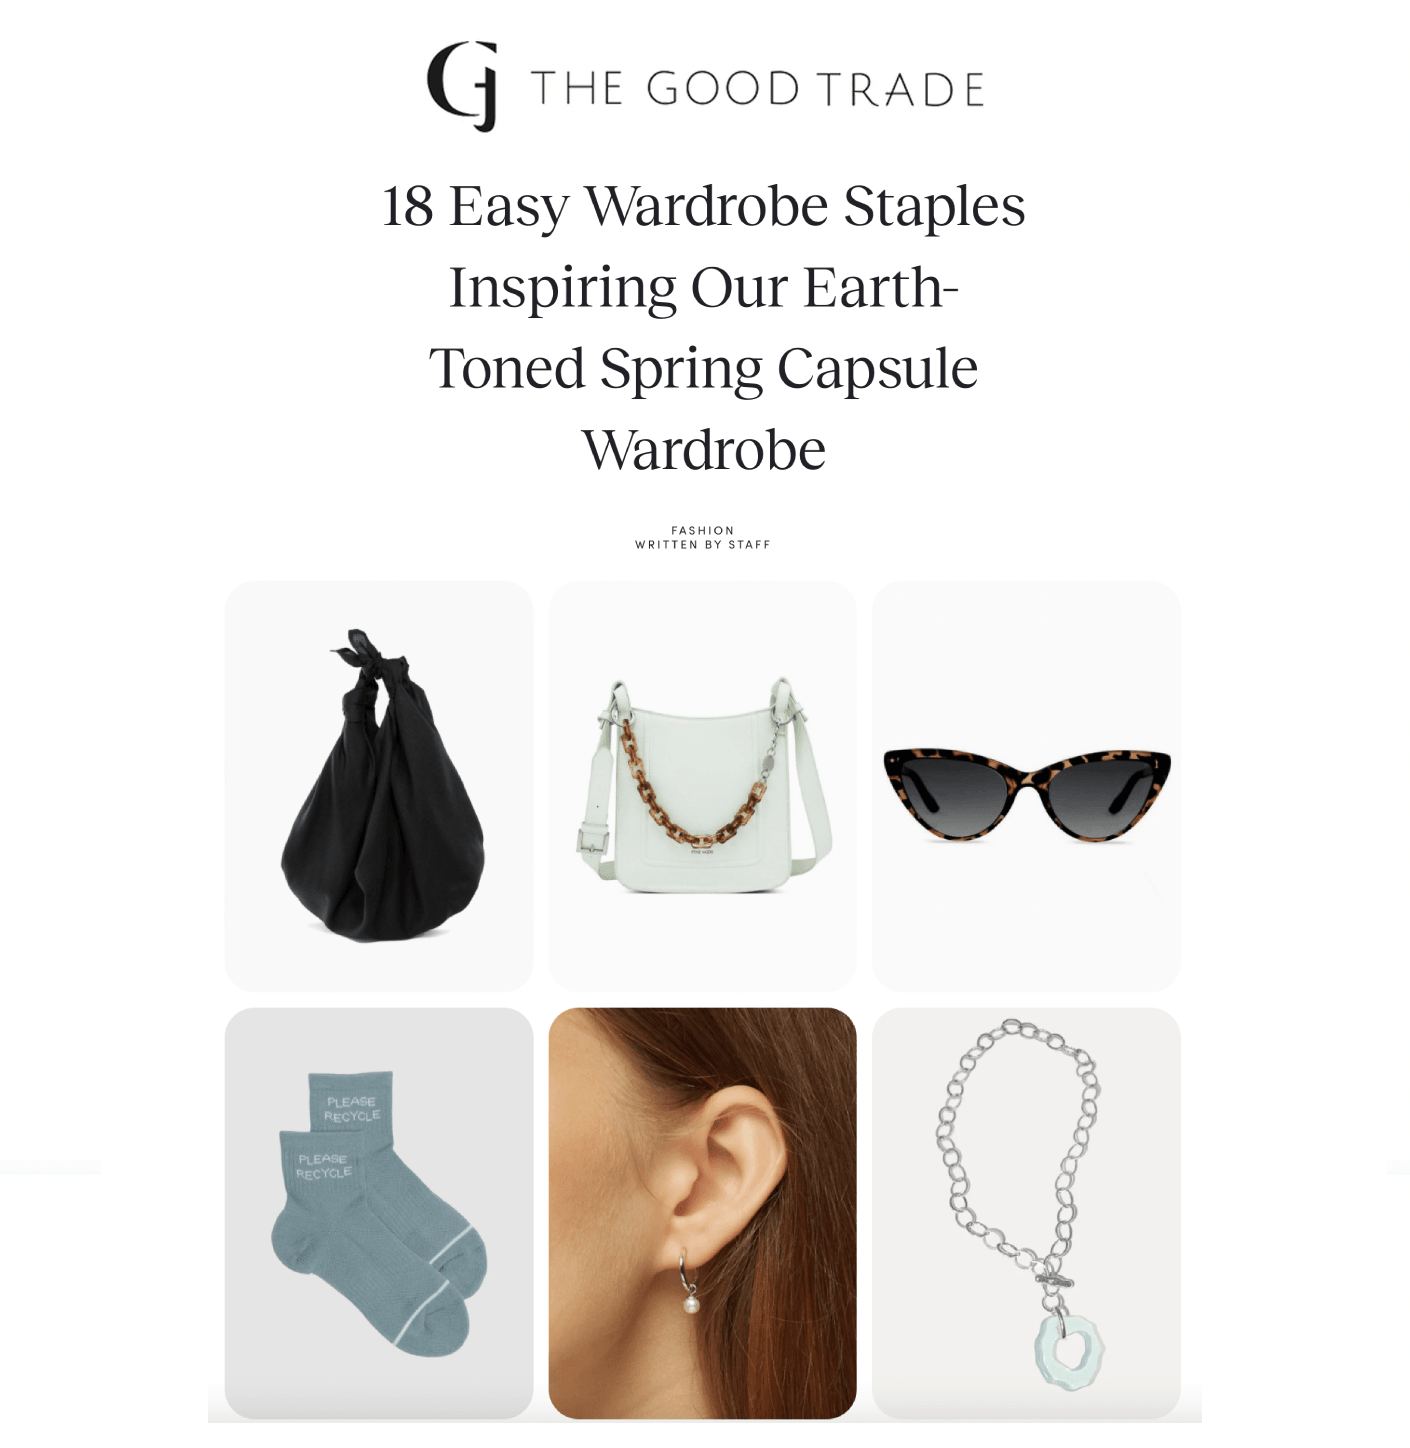 The Good Trade: 18 Easy Wardrobe Staples Inspiring Our Earth-Toned Spring Capsule Wardrobe - Pixie Mood Vegan Leather Bags